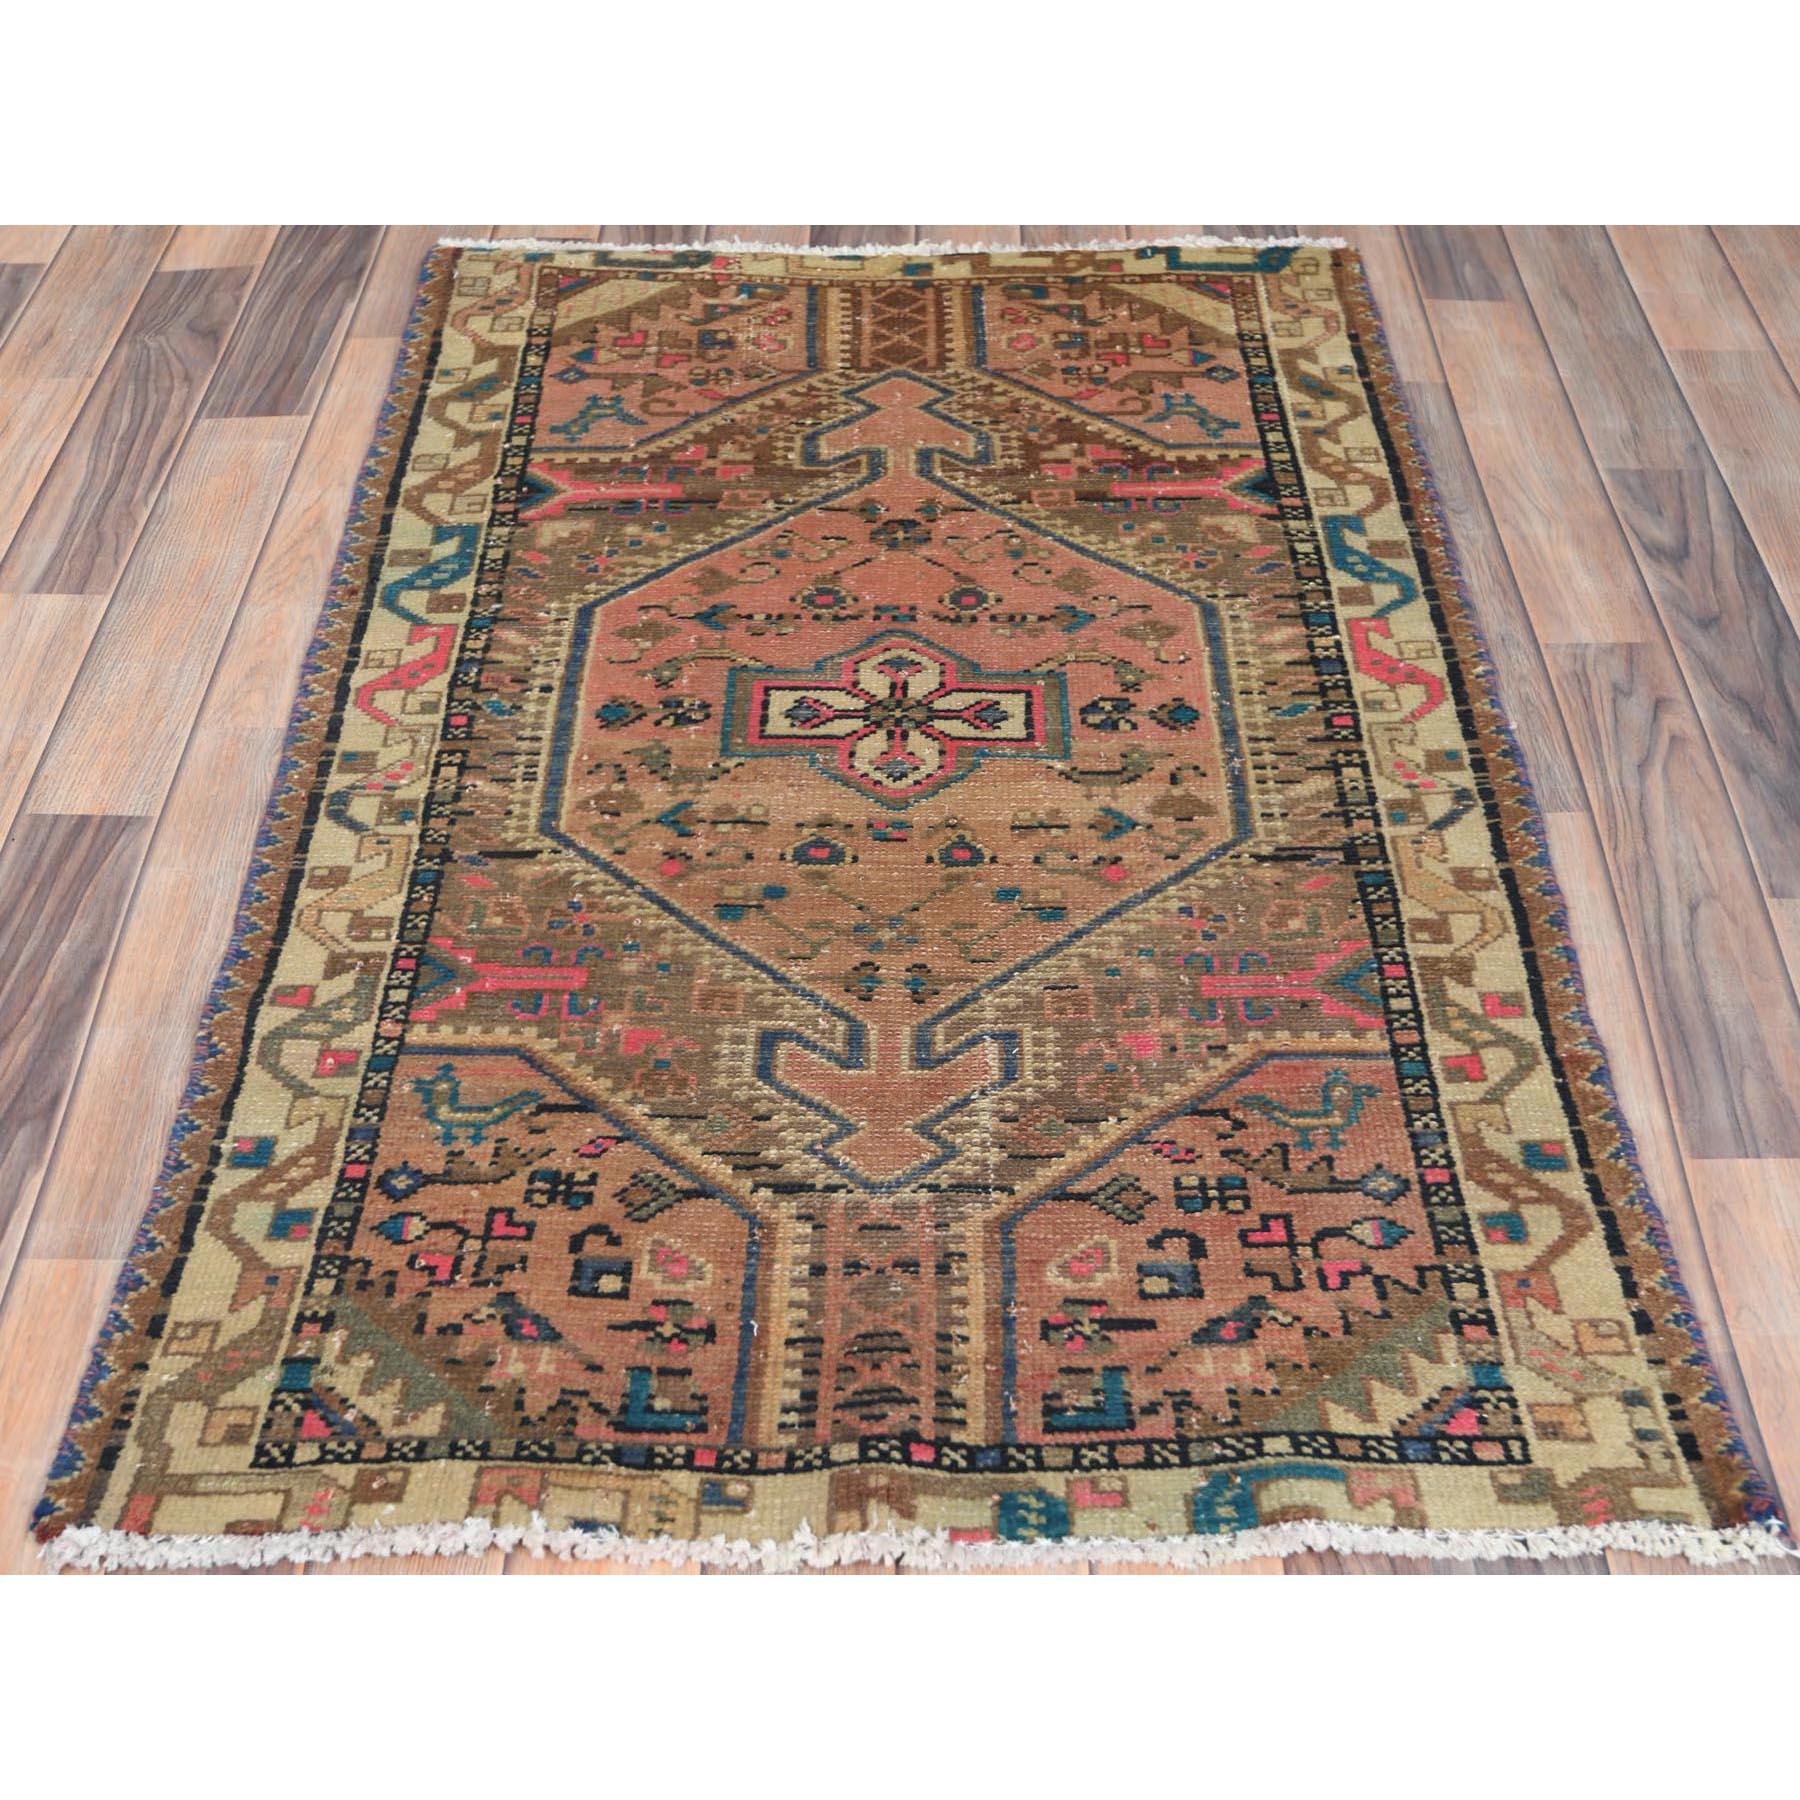 This fabulous Hand-Knotted carpet has been created and designed for extra strength and durability. This rug has been handcrafted for weeks in the traditional method that is used to make
Exact Rug Size in Feet and Inches : 2'8